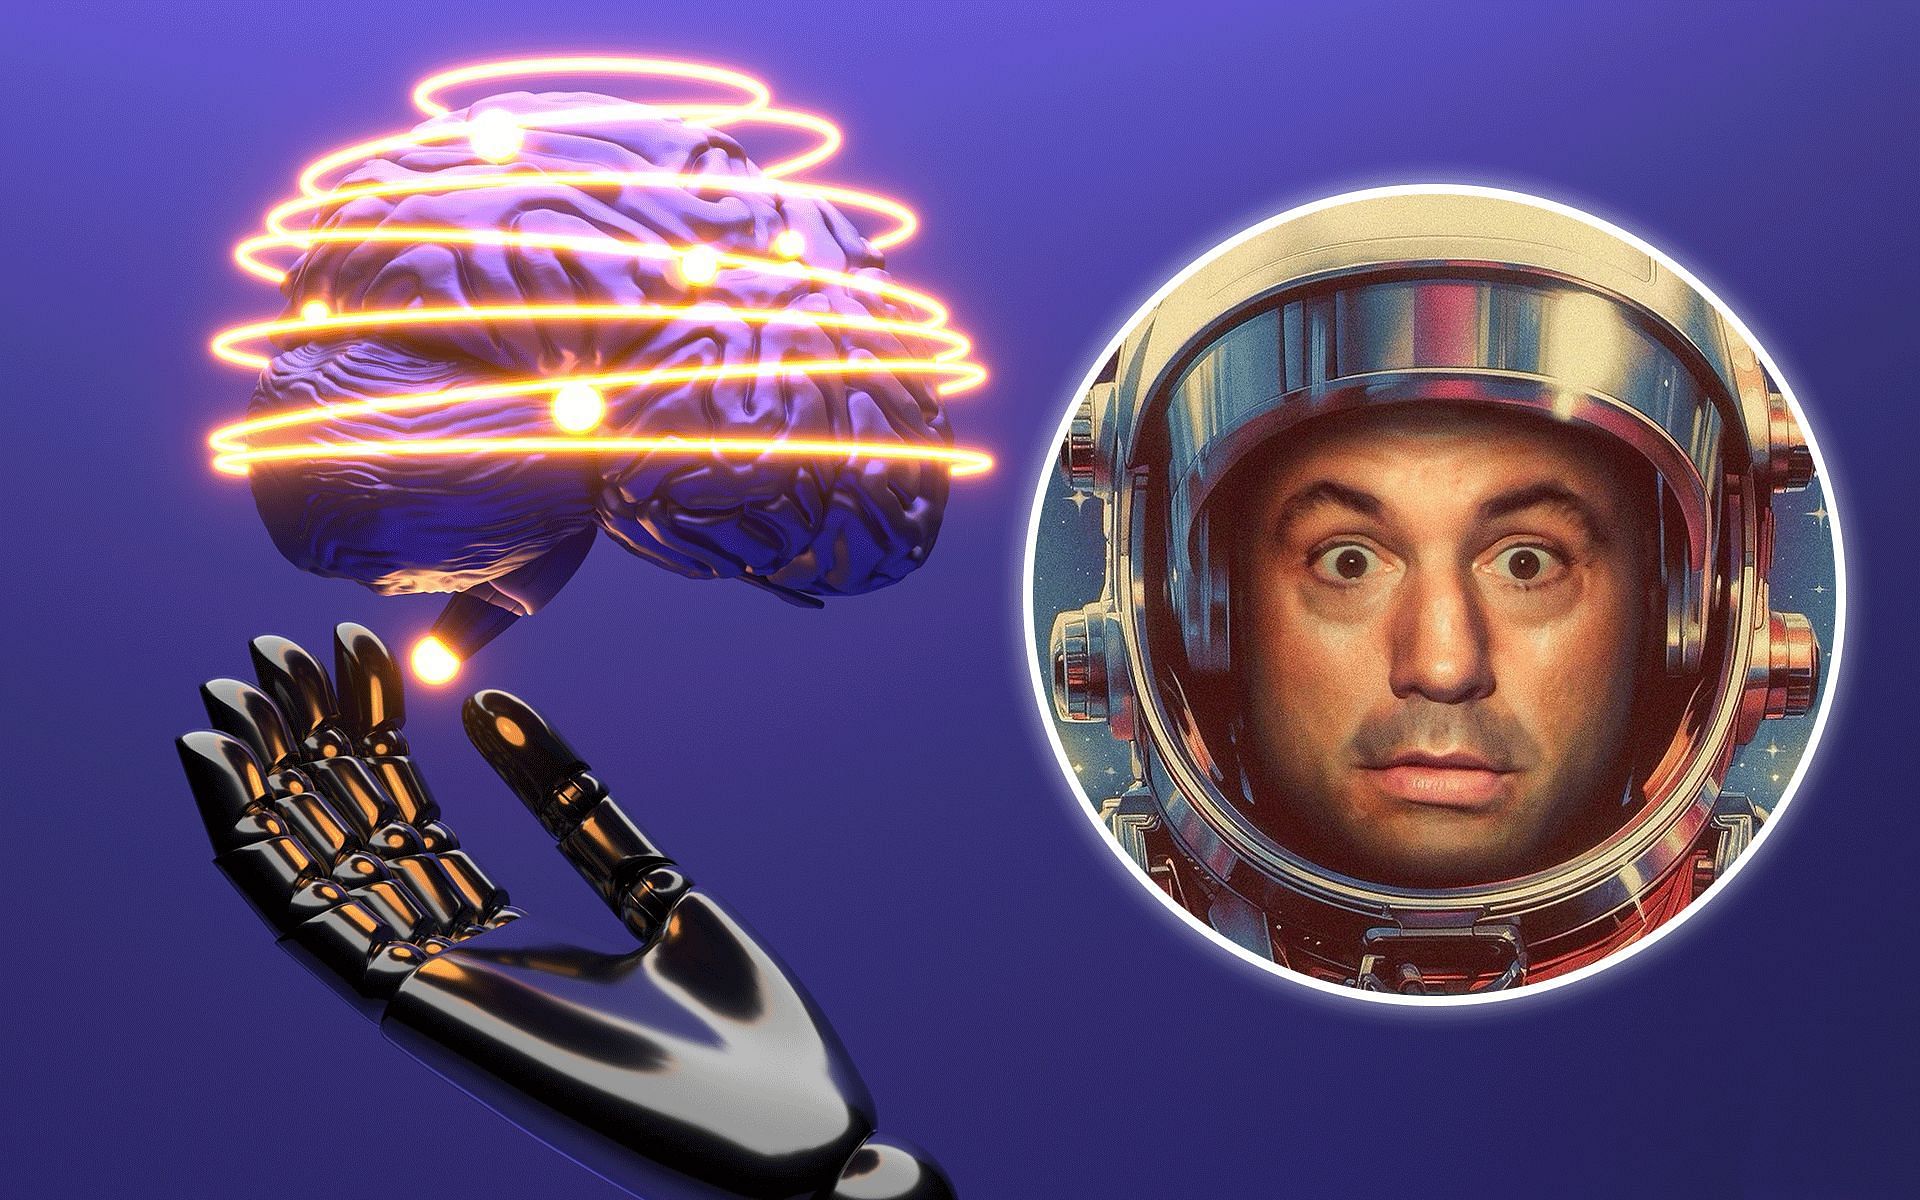 Joe Rogan gave his thoughts about the rise of AI [Images courtesy: @joerogan on Instagram and Free Stock]